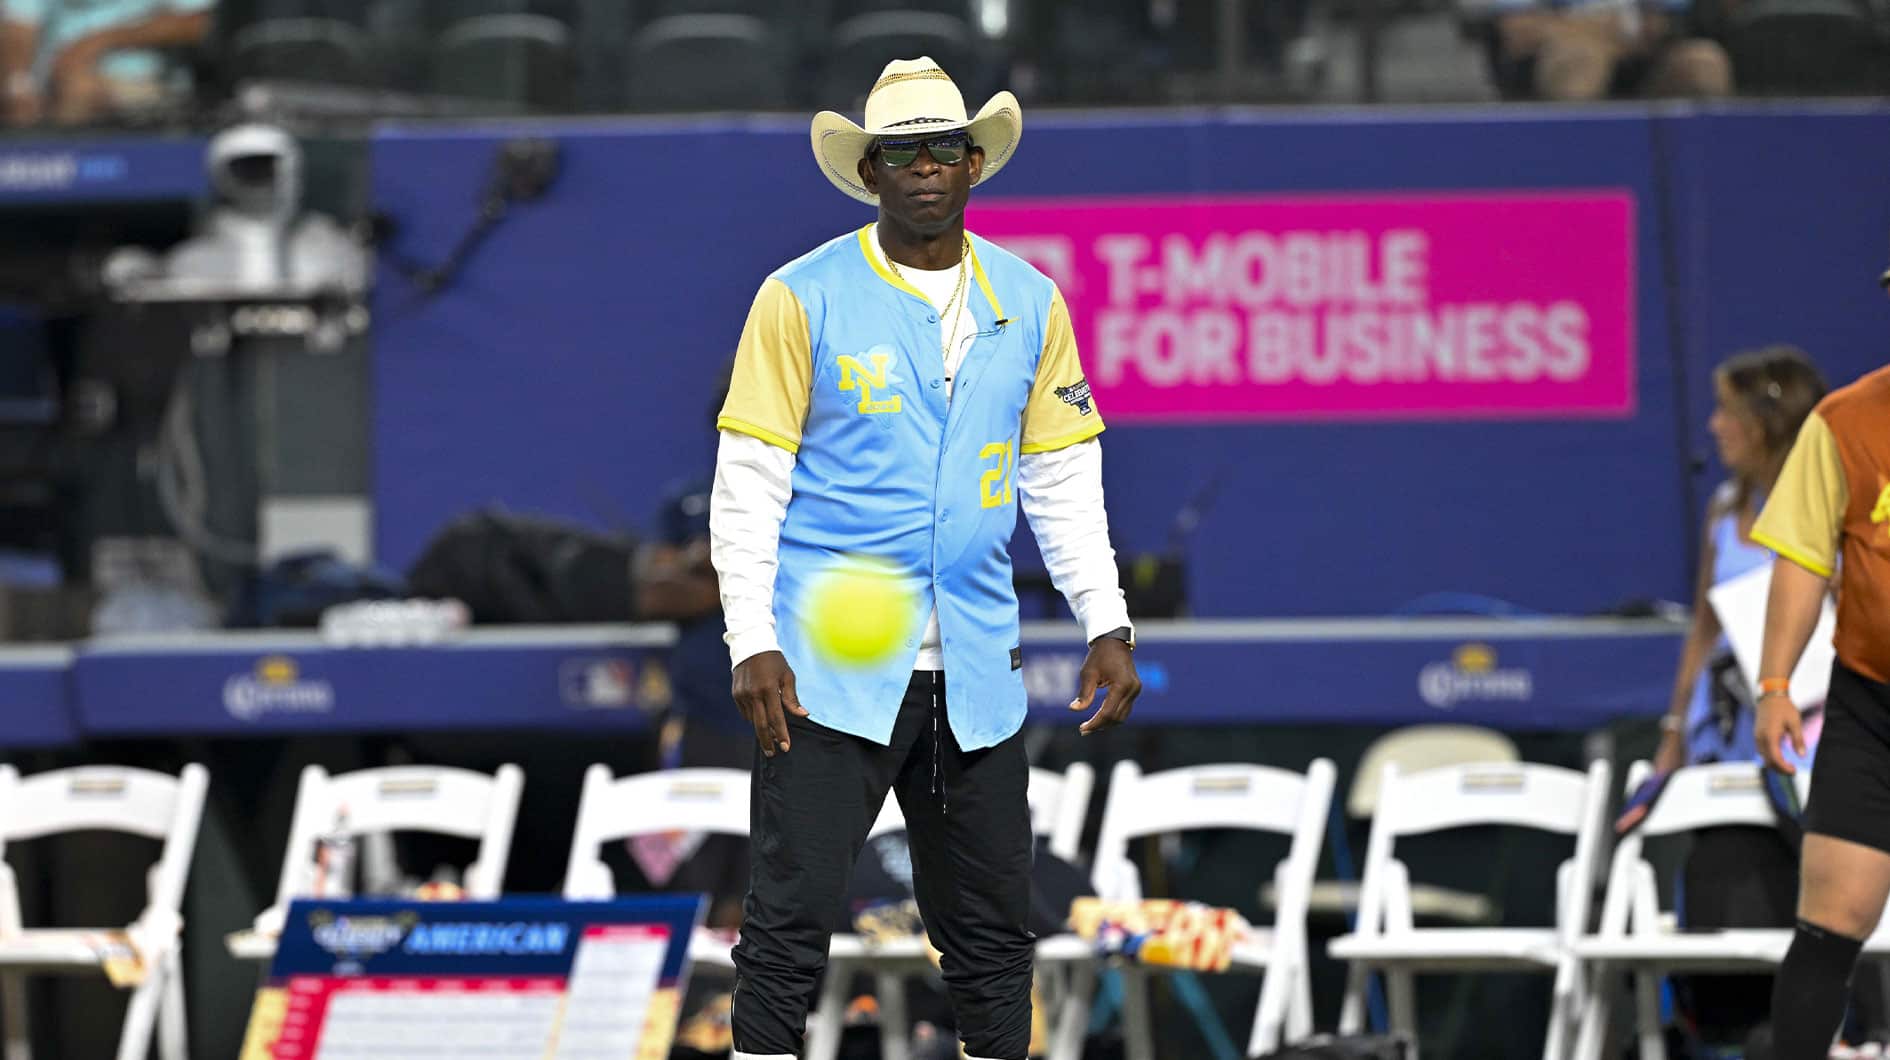 Jul 13, 2024; Arlington, TX, USA; Colorado Buffalos head coach and former MLB and NFL player Deion Sanders (21) of the National League watches the ball in play during the 2024 All Star Celebrity Softball Game at Globe Life Field. Mandatory Credit: Jerome Miron-USA TODAY Sports